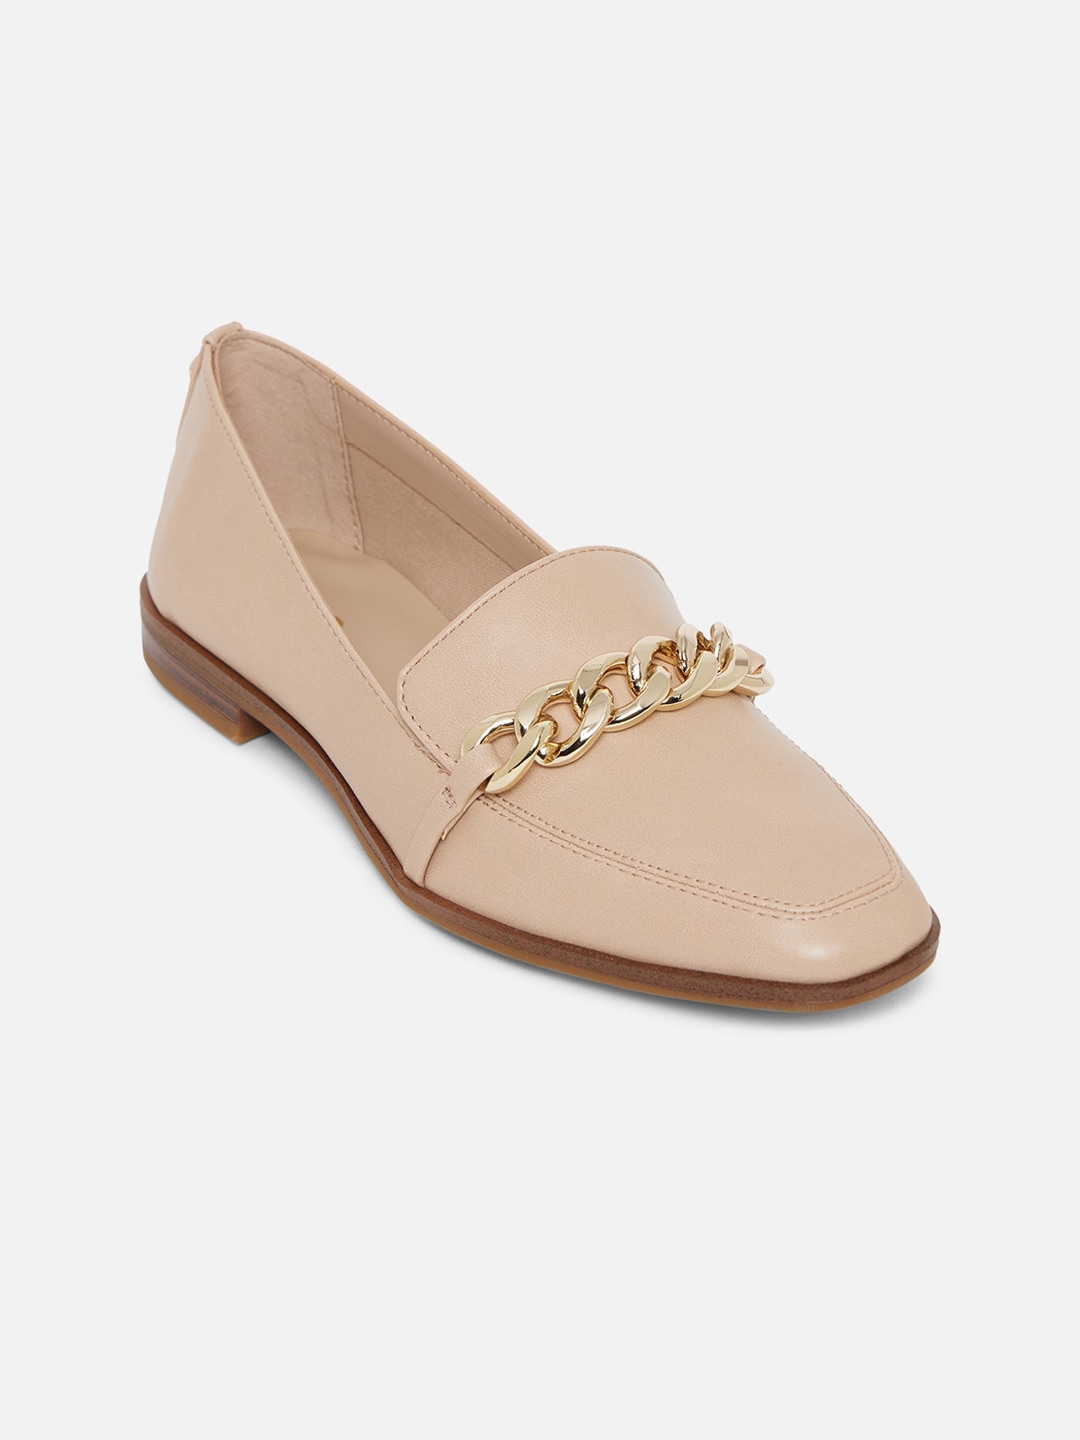 ALDO Women Beige Woven Design Loafers With Western Embellishments Price in India